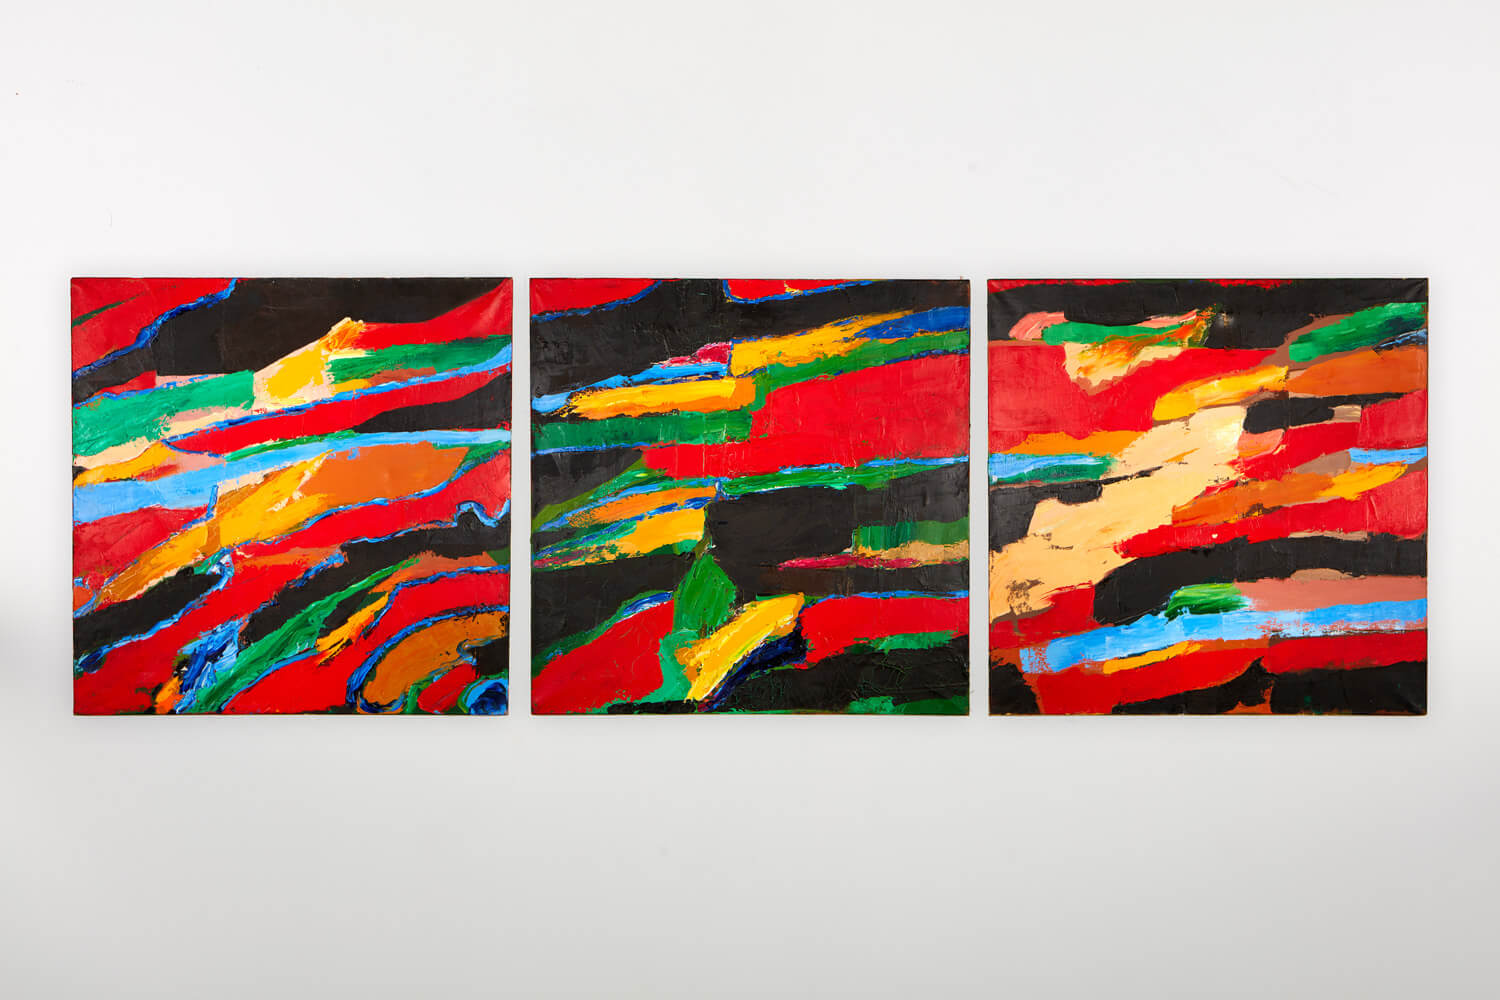 JB203 - Triptych 3 Canvases - 1993 - 76.5 x 76 cm - Oil on canvas